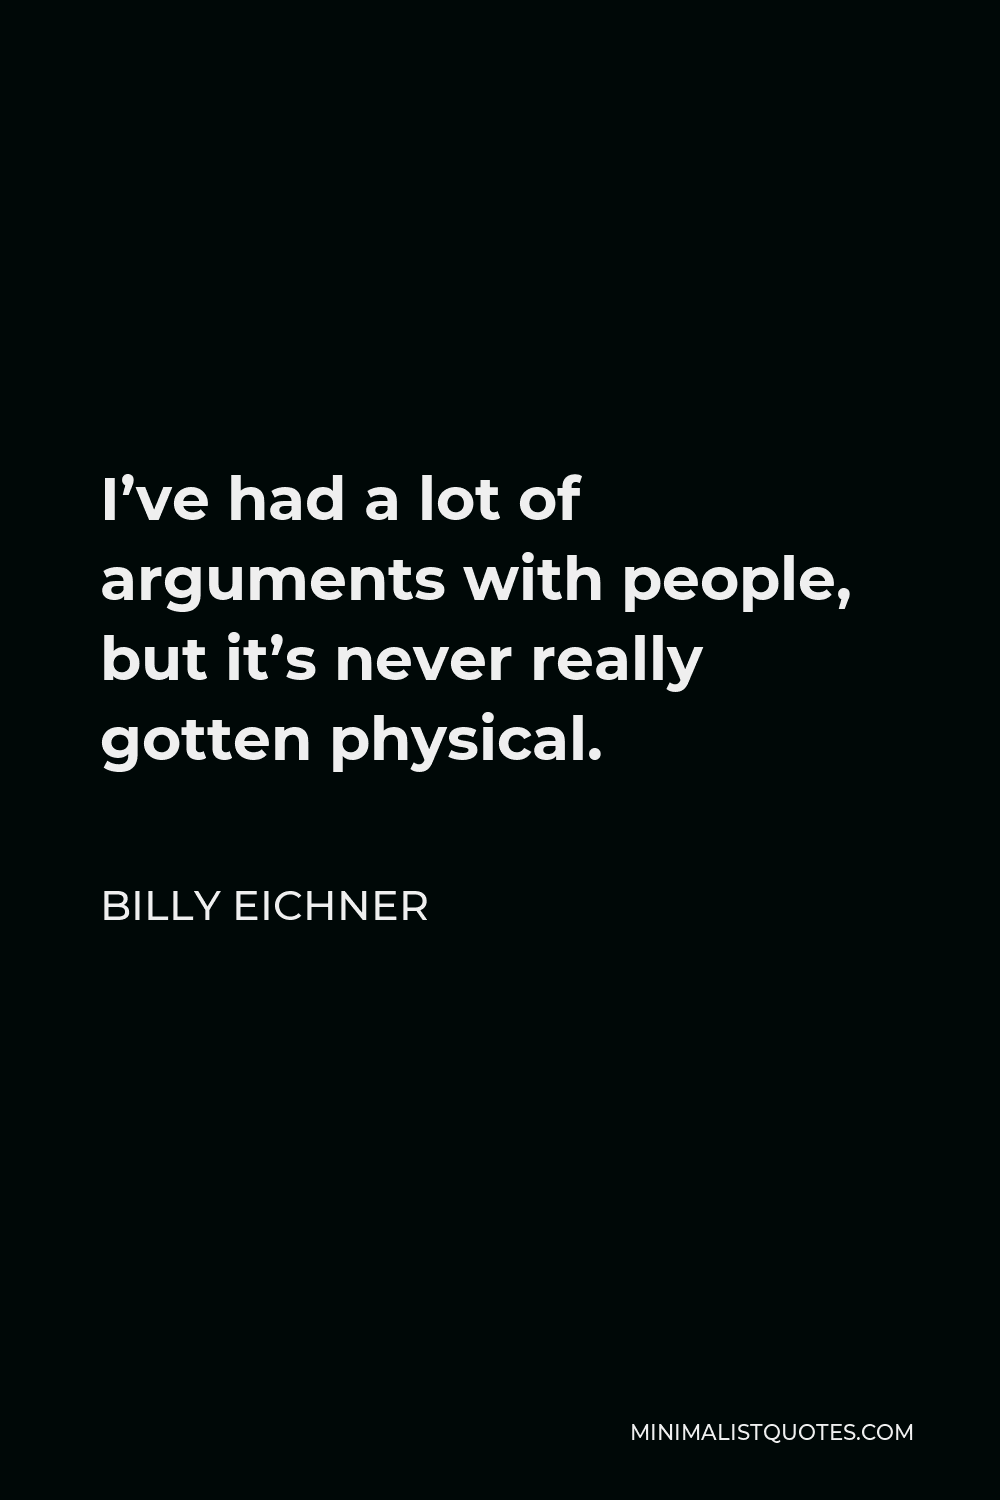 Billy Eichner Quote - I’ve had a lot of arguments with people, but it’s never really gotten physical.